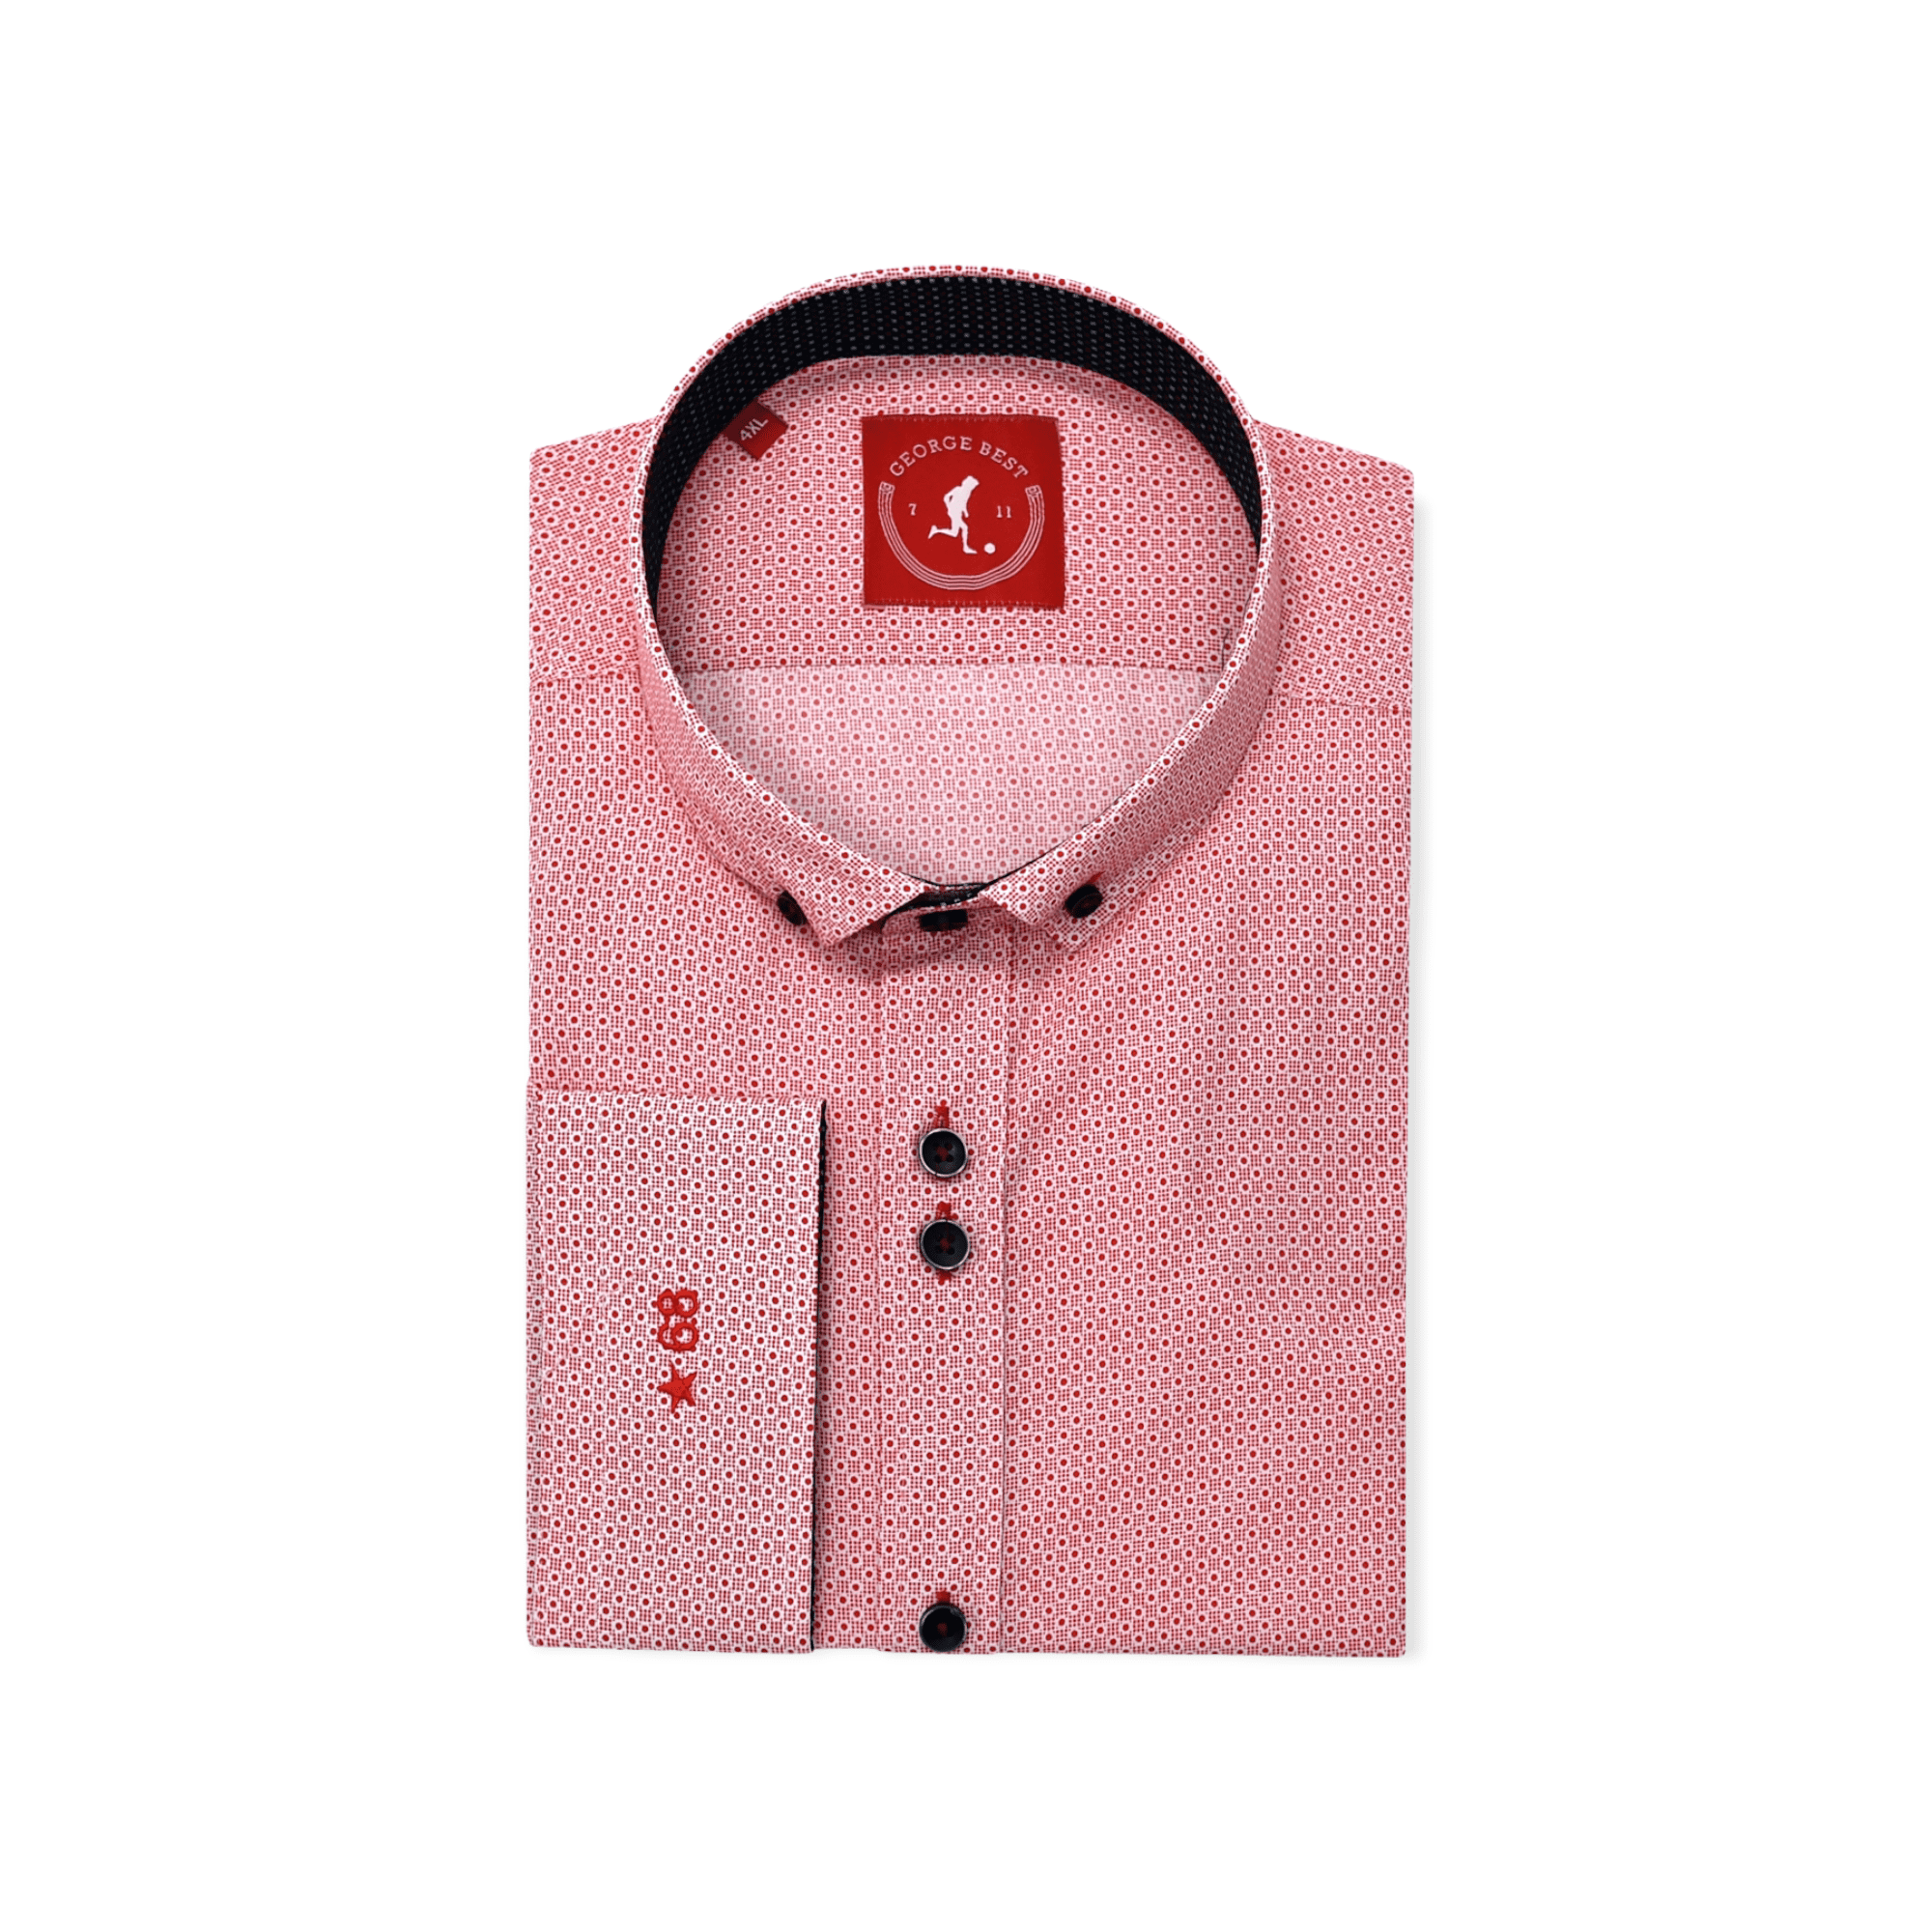 Red Print Shirt With Button Down Collar